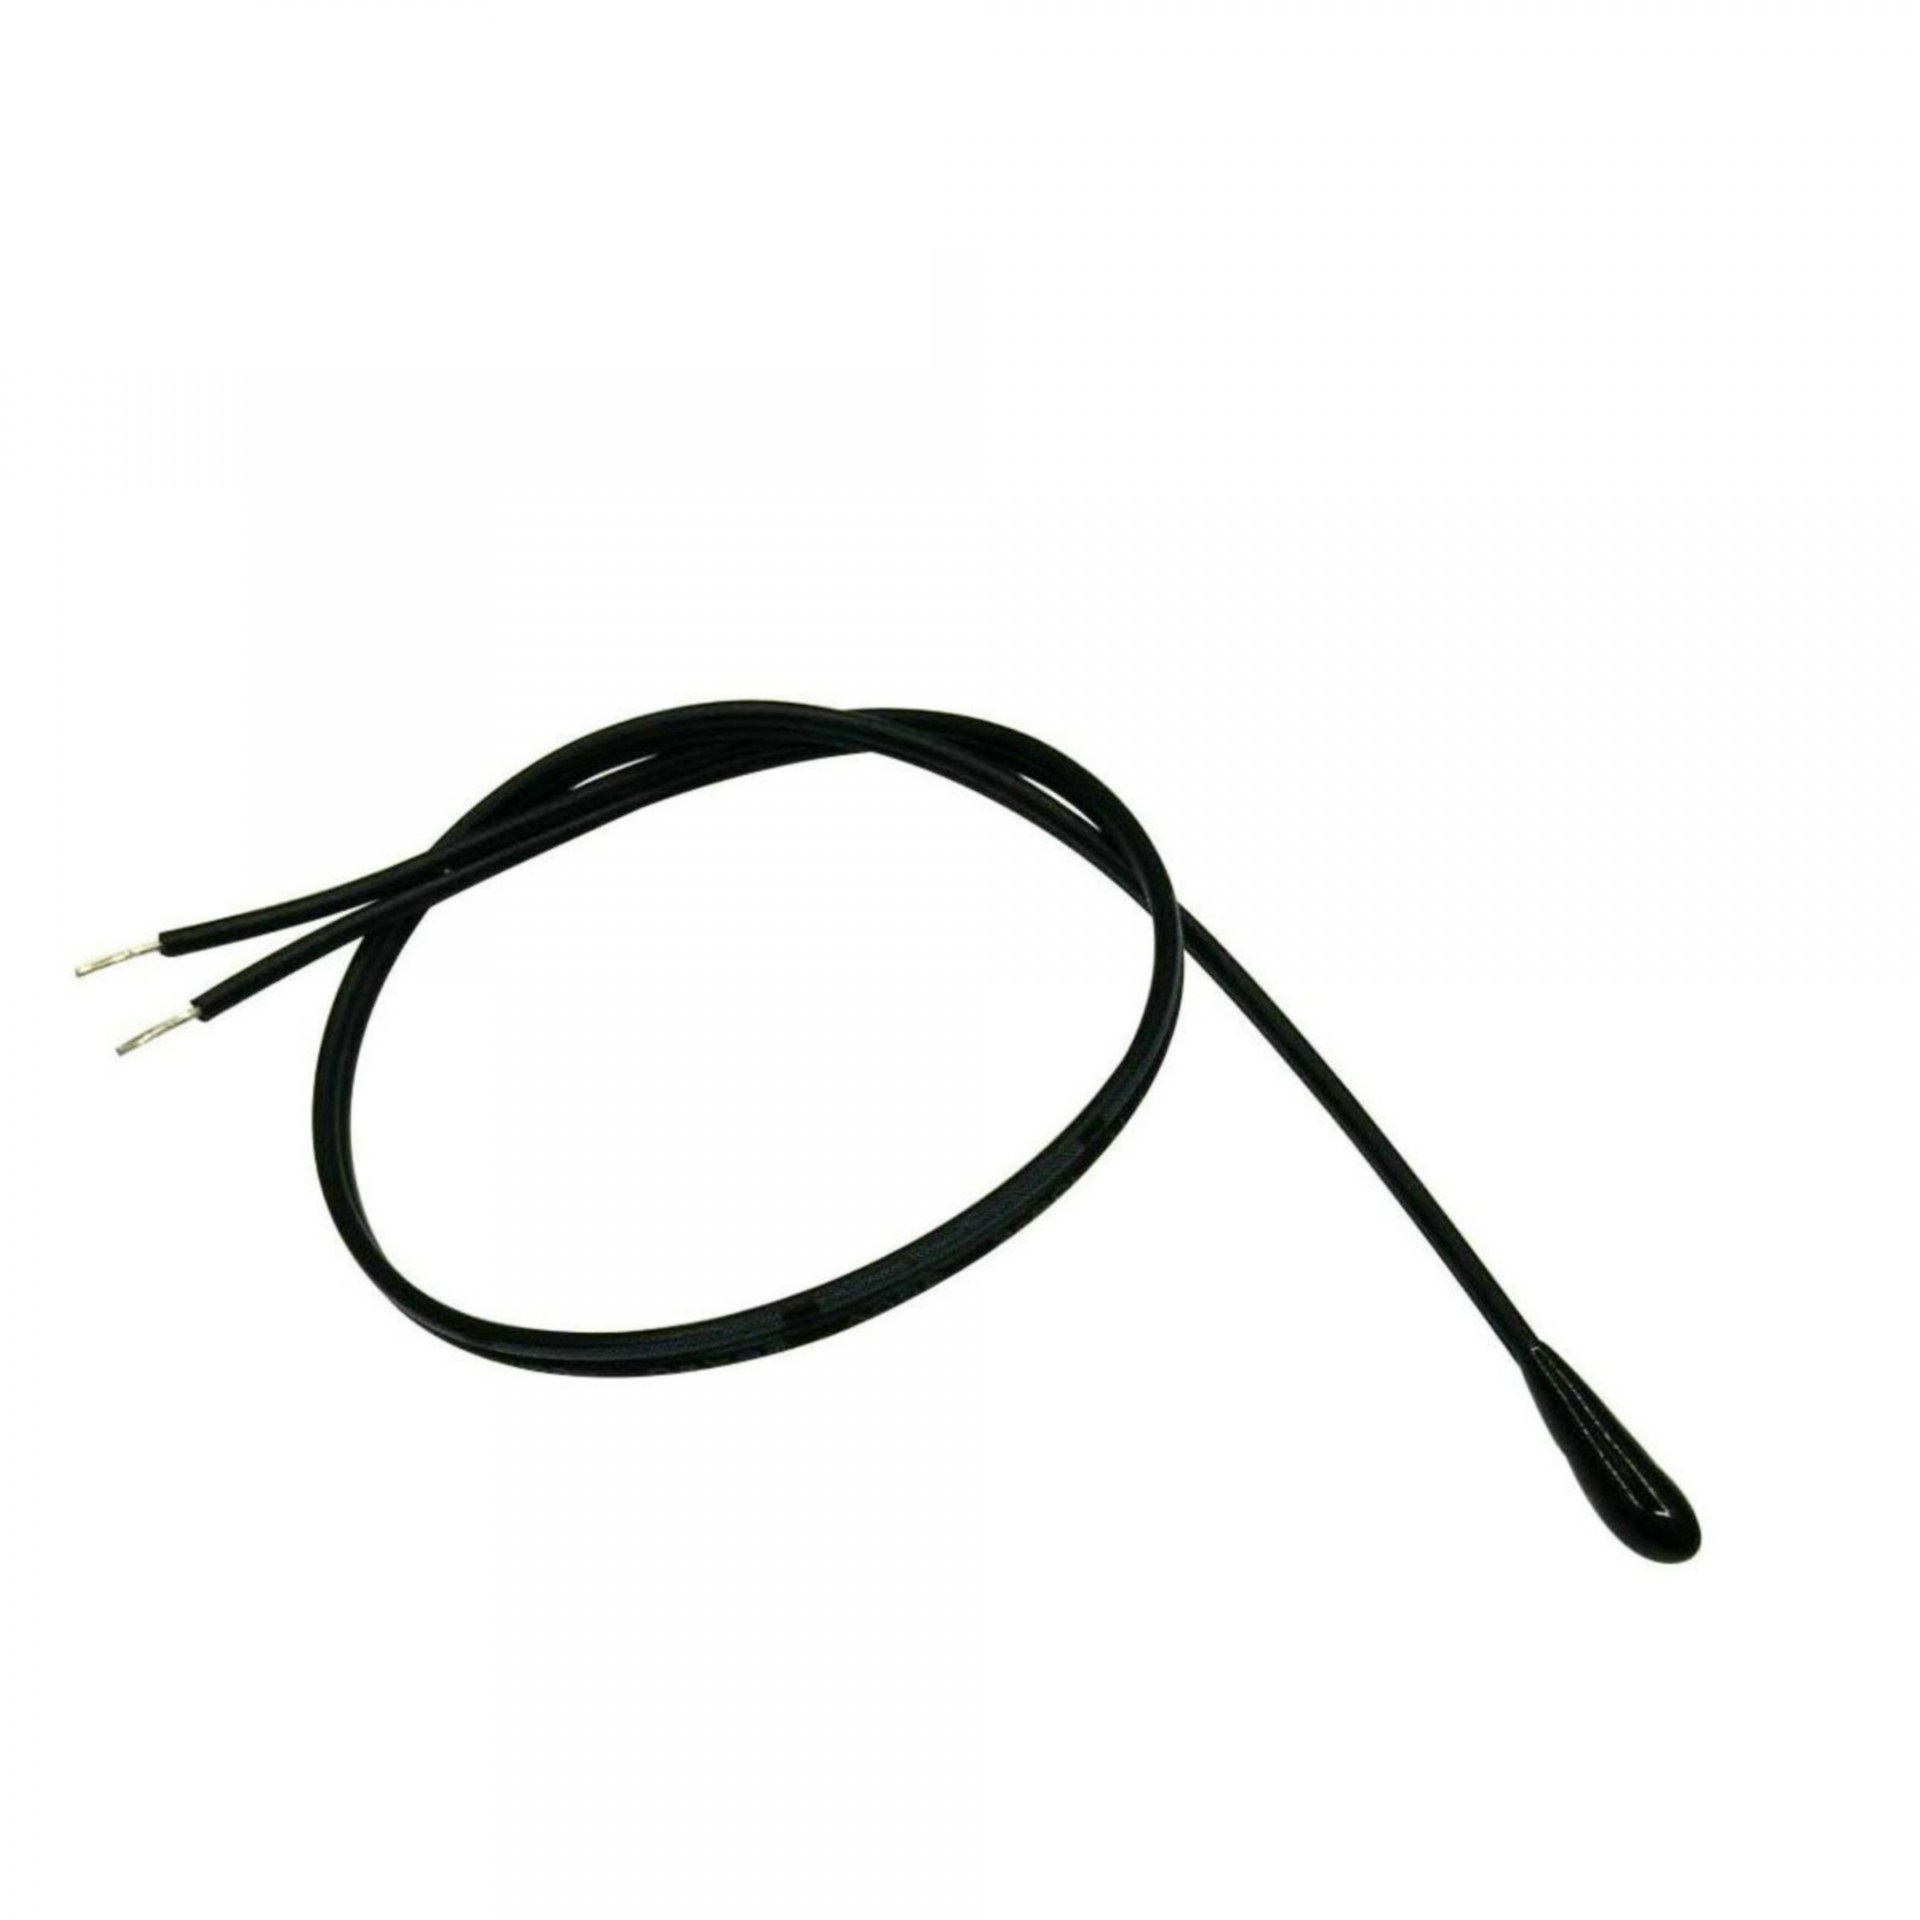 NTC thermistor for battery pack